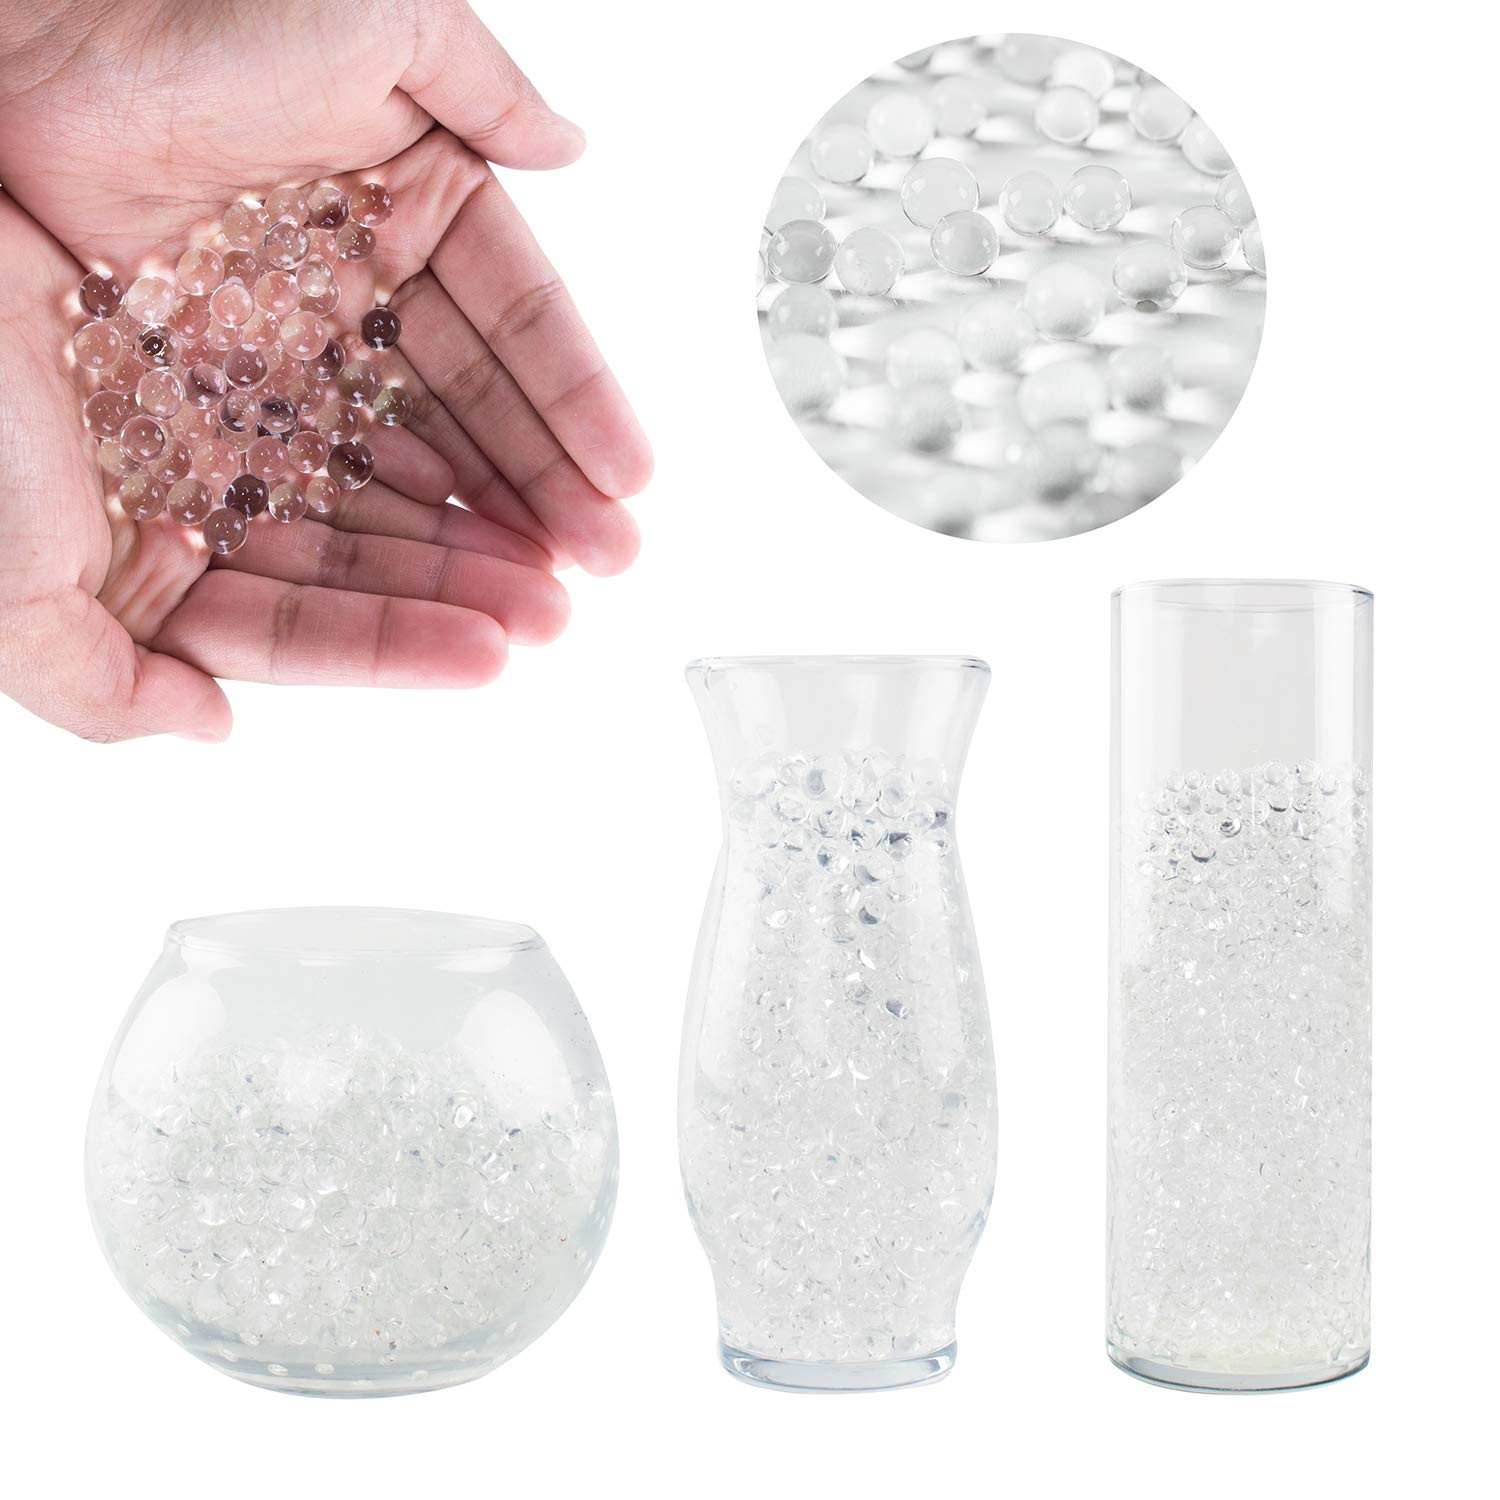 14 Awesome Home Decor Vase Fillers 2024 free download home decor vase fillers of best floating pearls for centerpieces amazon com intended for super z outlet 1 pound bag of clear water gel beads pearls for vase filler candles wedding centerpiec